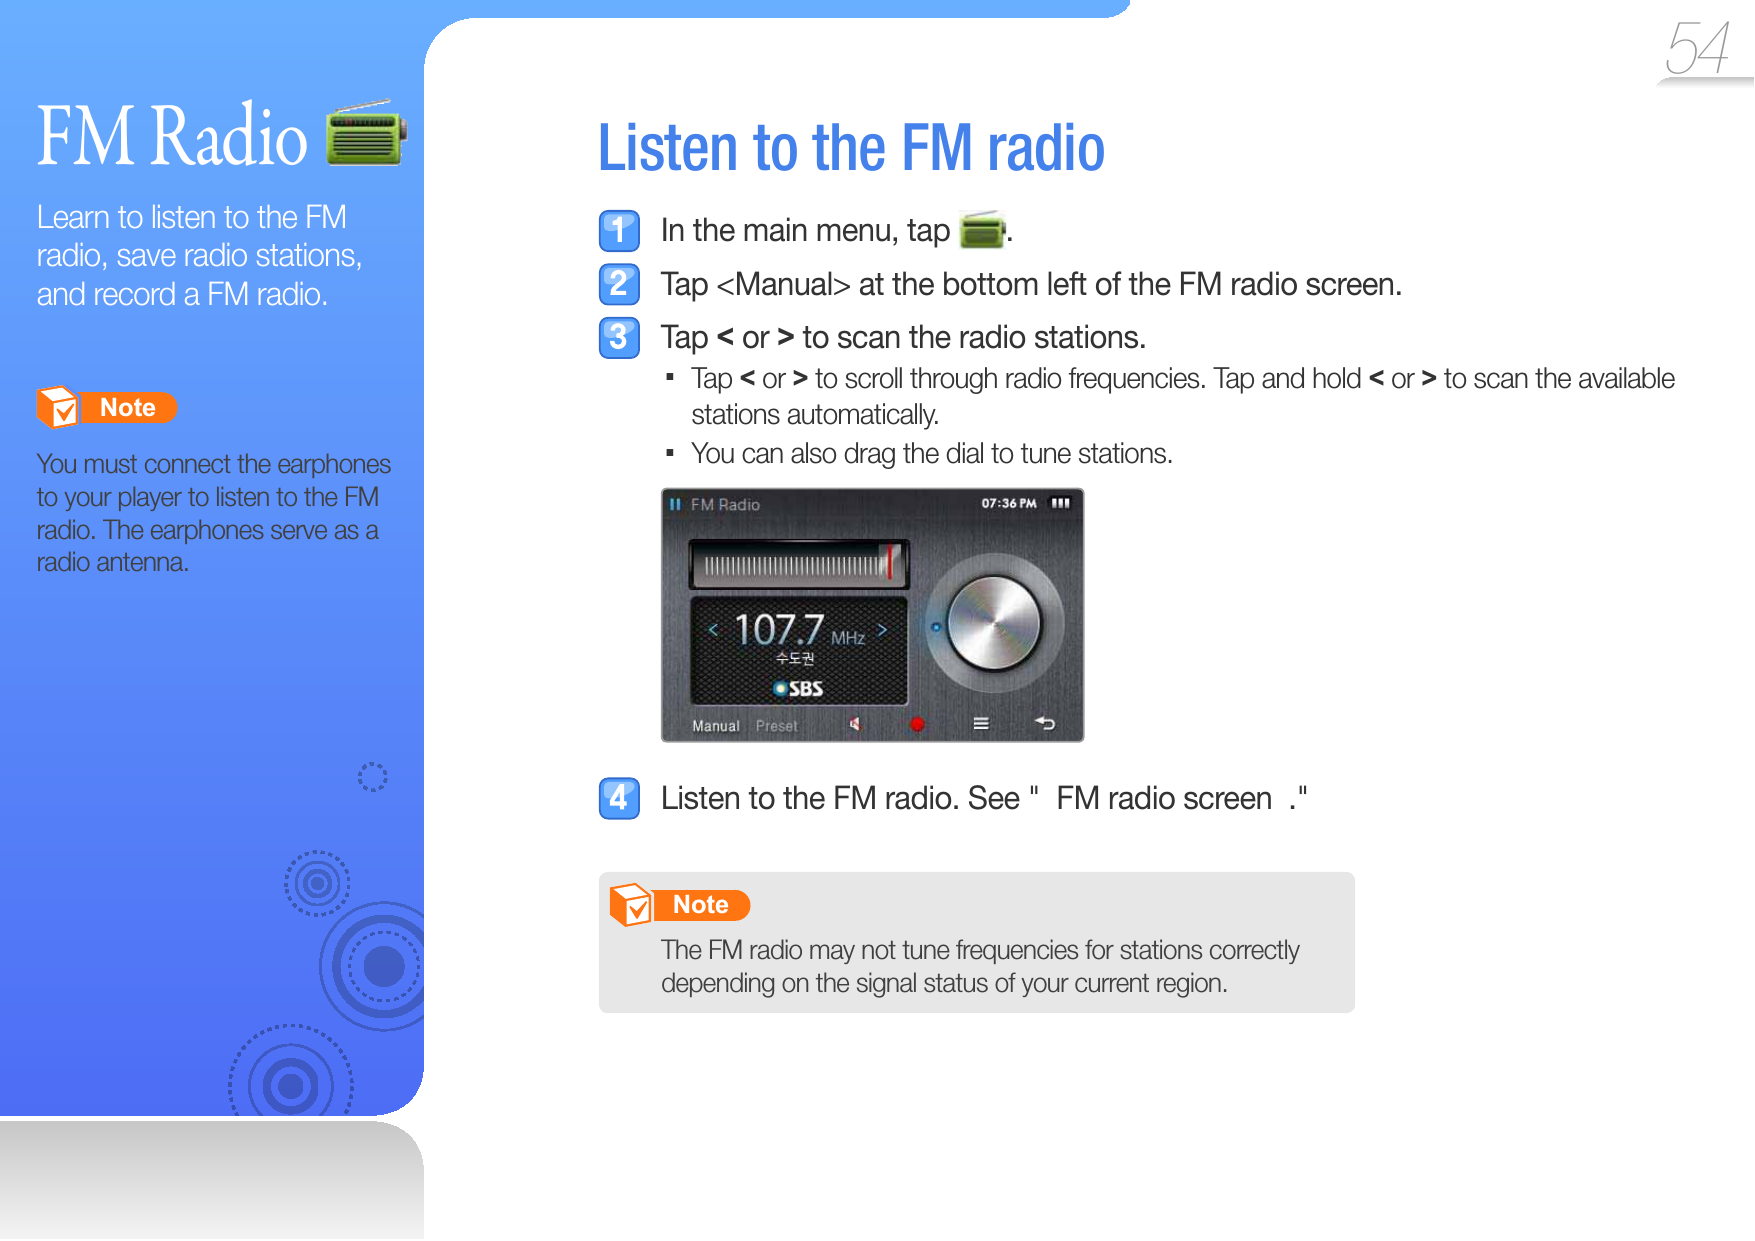 54FM RadioLearn to listen to the FM radio, save radio stations, and record a FM radio.       Note   You must connect the earphones to your player to listen to the FM radio. The earphones serve as a radio antenna. Listen to the  FM radio  In the main menu, tap  .  Tap &lt;Manual&gt; at the bottom left of the FM radio screen. Tap &lt; or &gt; to scan the radio stations.Tap  &lt; or &gt; to scroll through radio frequencies. Tap and hold &lt; or &gt; to scan the available stations automatically. You can also drag the dial to tune stations.   Listen to the FM radio. See &quot;  FM radio screen  .&quot;       Note   The FM radio may not tune frequencies for stations correctly depending on the signal status of your current region.